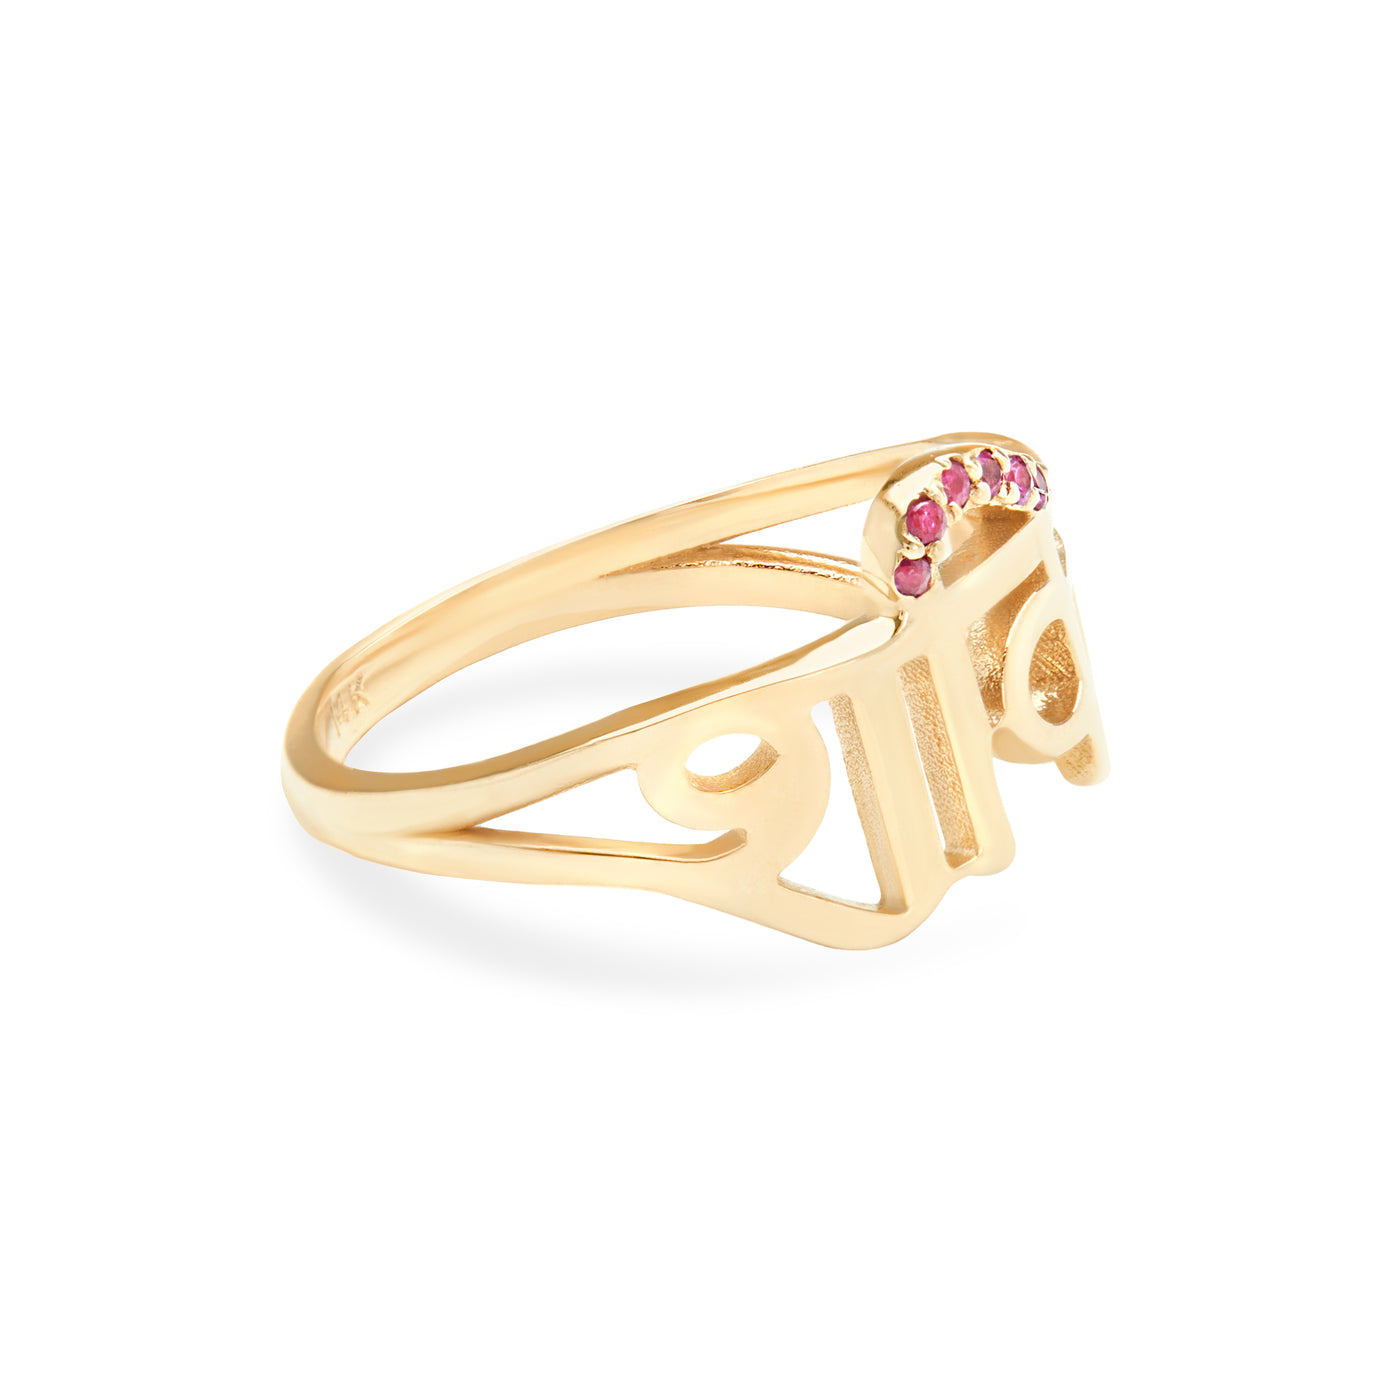 14 Karat Yellow Gold Ring That says Shakti-Stength with Ruby Detail Against White Background turned for detail